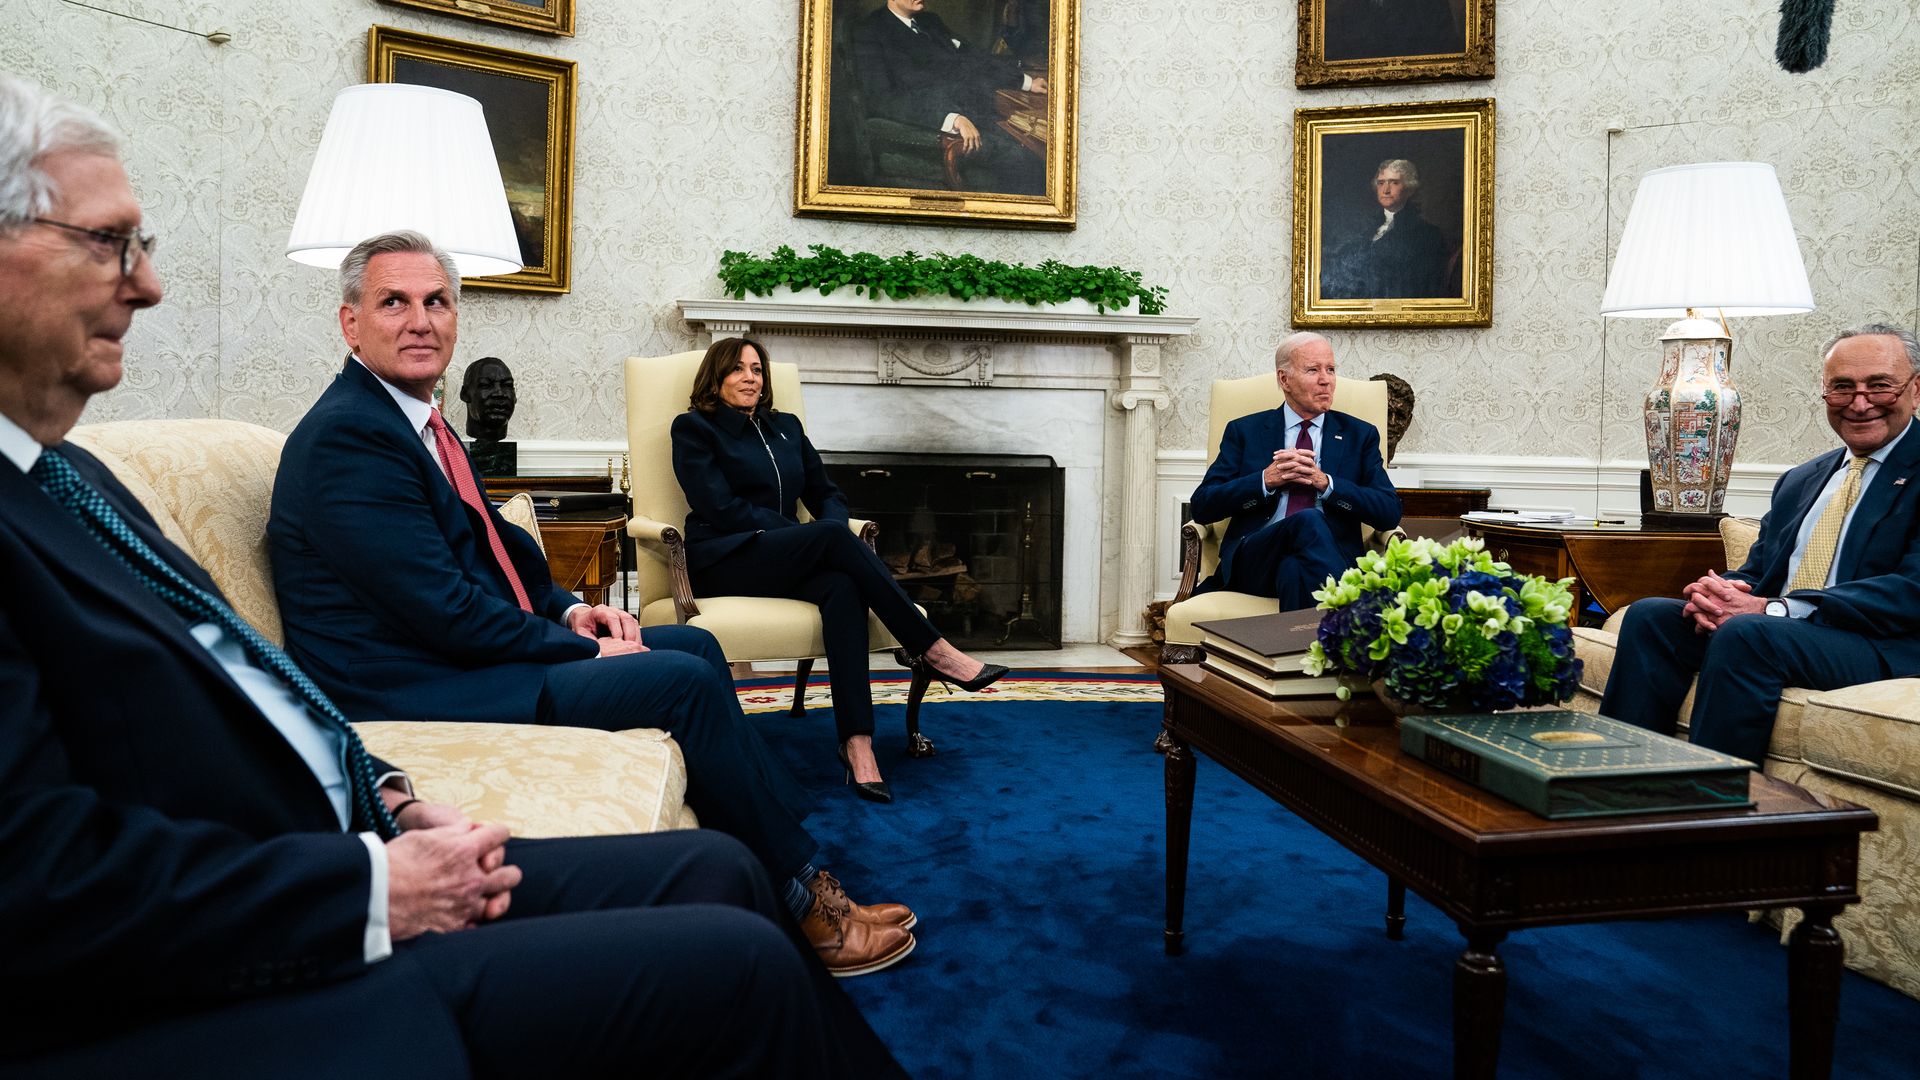 US President Joe Biden and Vice President Kamala Harris sit with House Speaker Kevin McCarthy, Minority Leader Mitch McConnell, and Senate Majority Leader Chuck Schumer in the Oval Office of the White House.